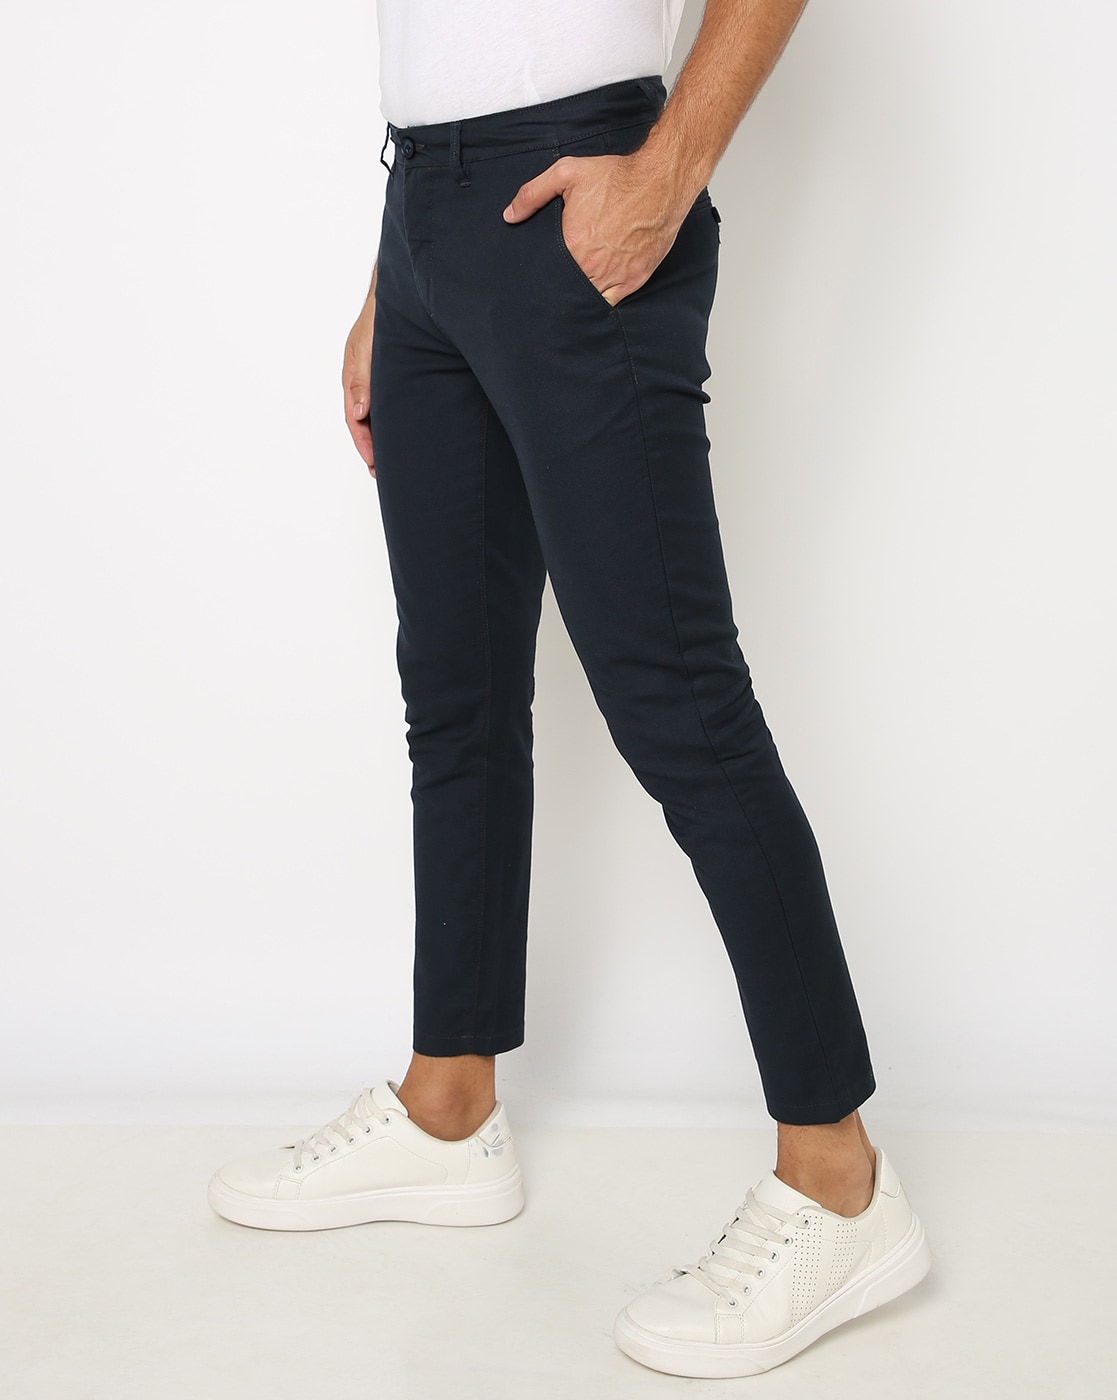 Buy Skinny Fit Ankle-Length Chinos Online at Best Prices in India - JioMart.